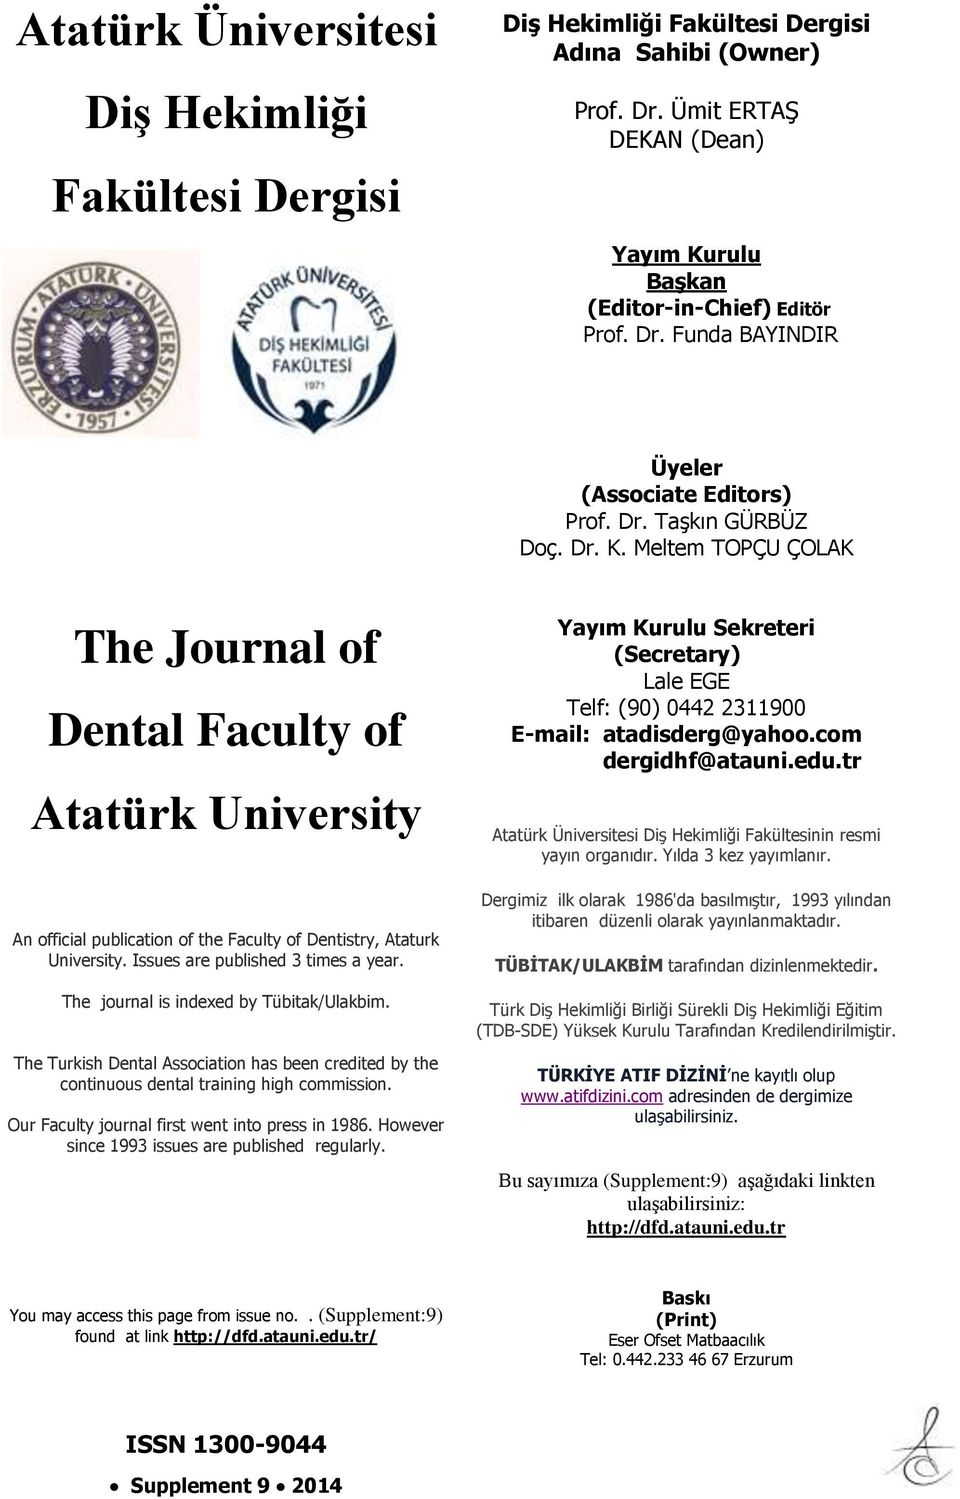 Issues are published 3 times a year. The journal is indexed by Tübitak/Ulakbim. The Turkish Dental Association has been credited by the continuous dental training high commission.